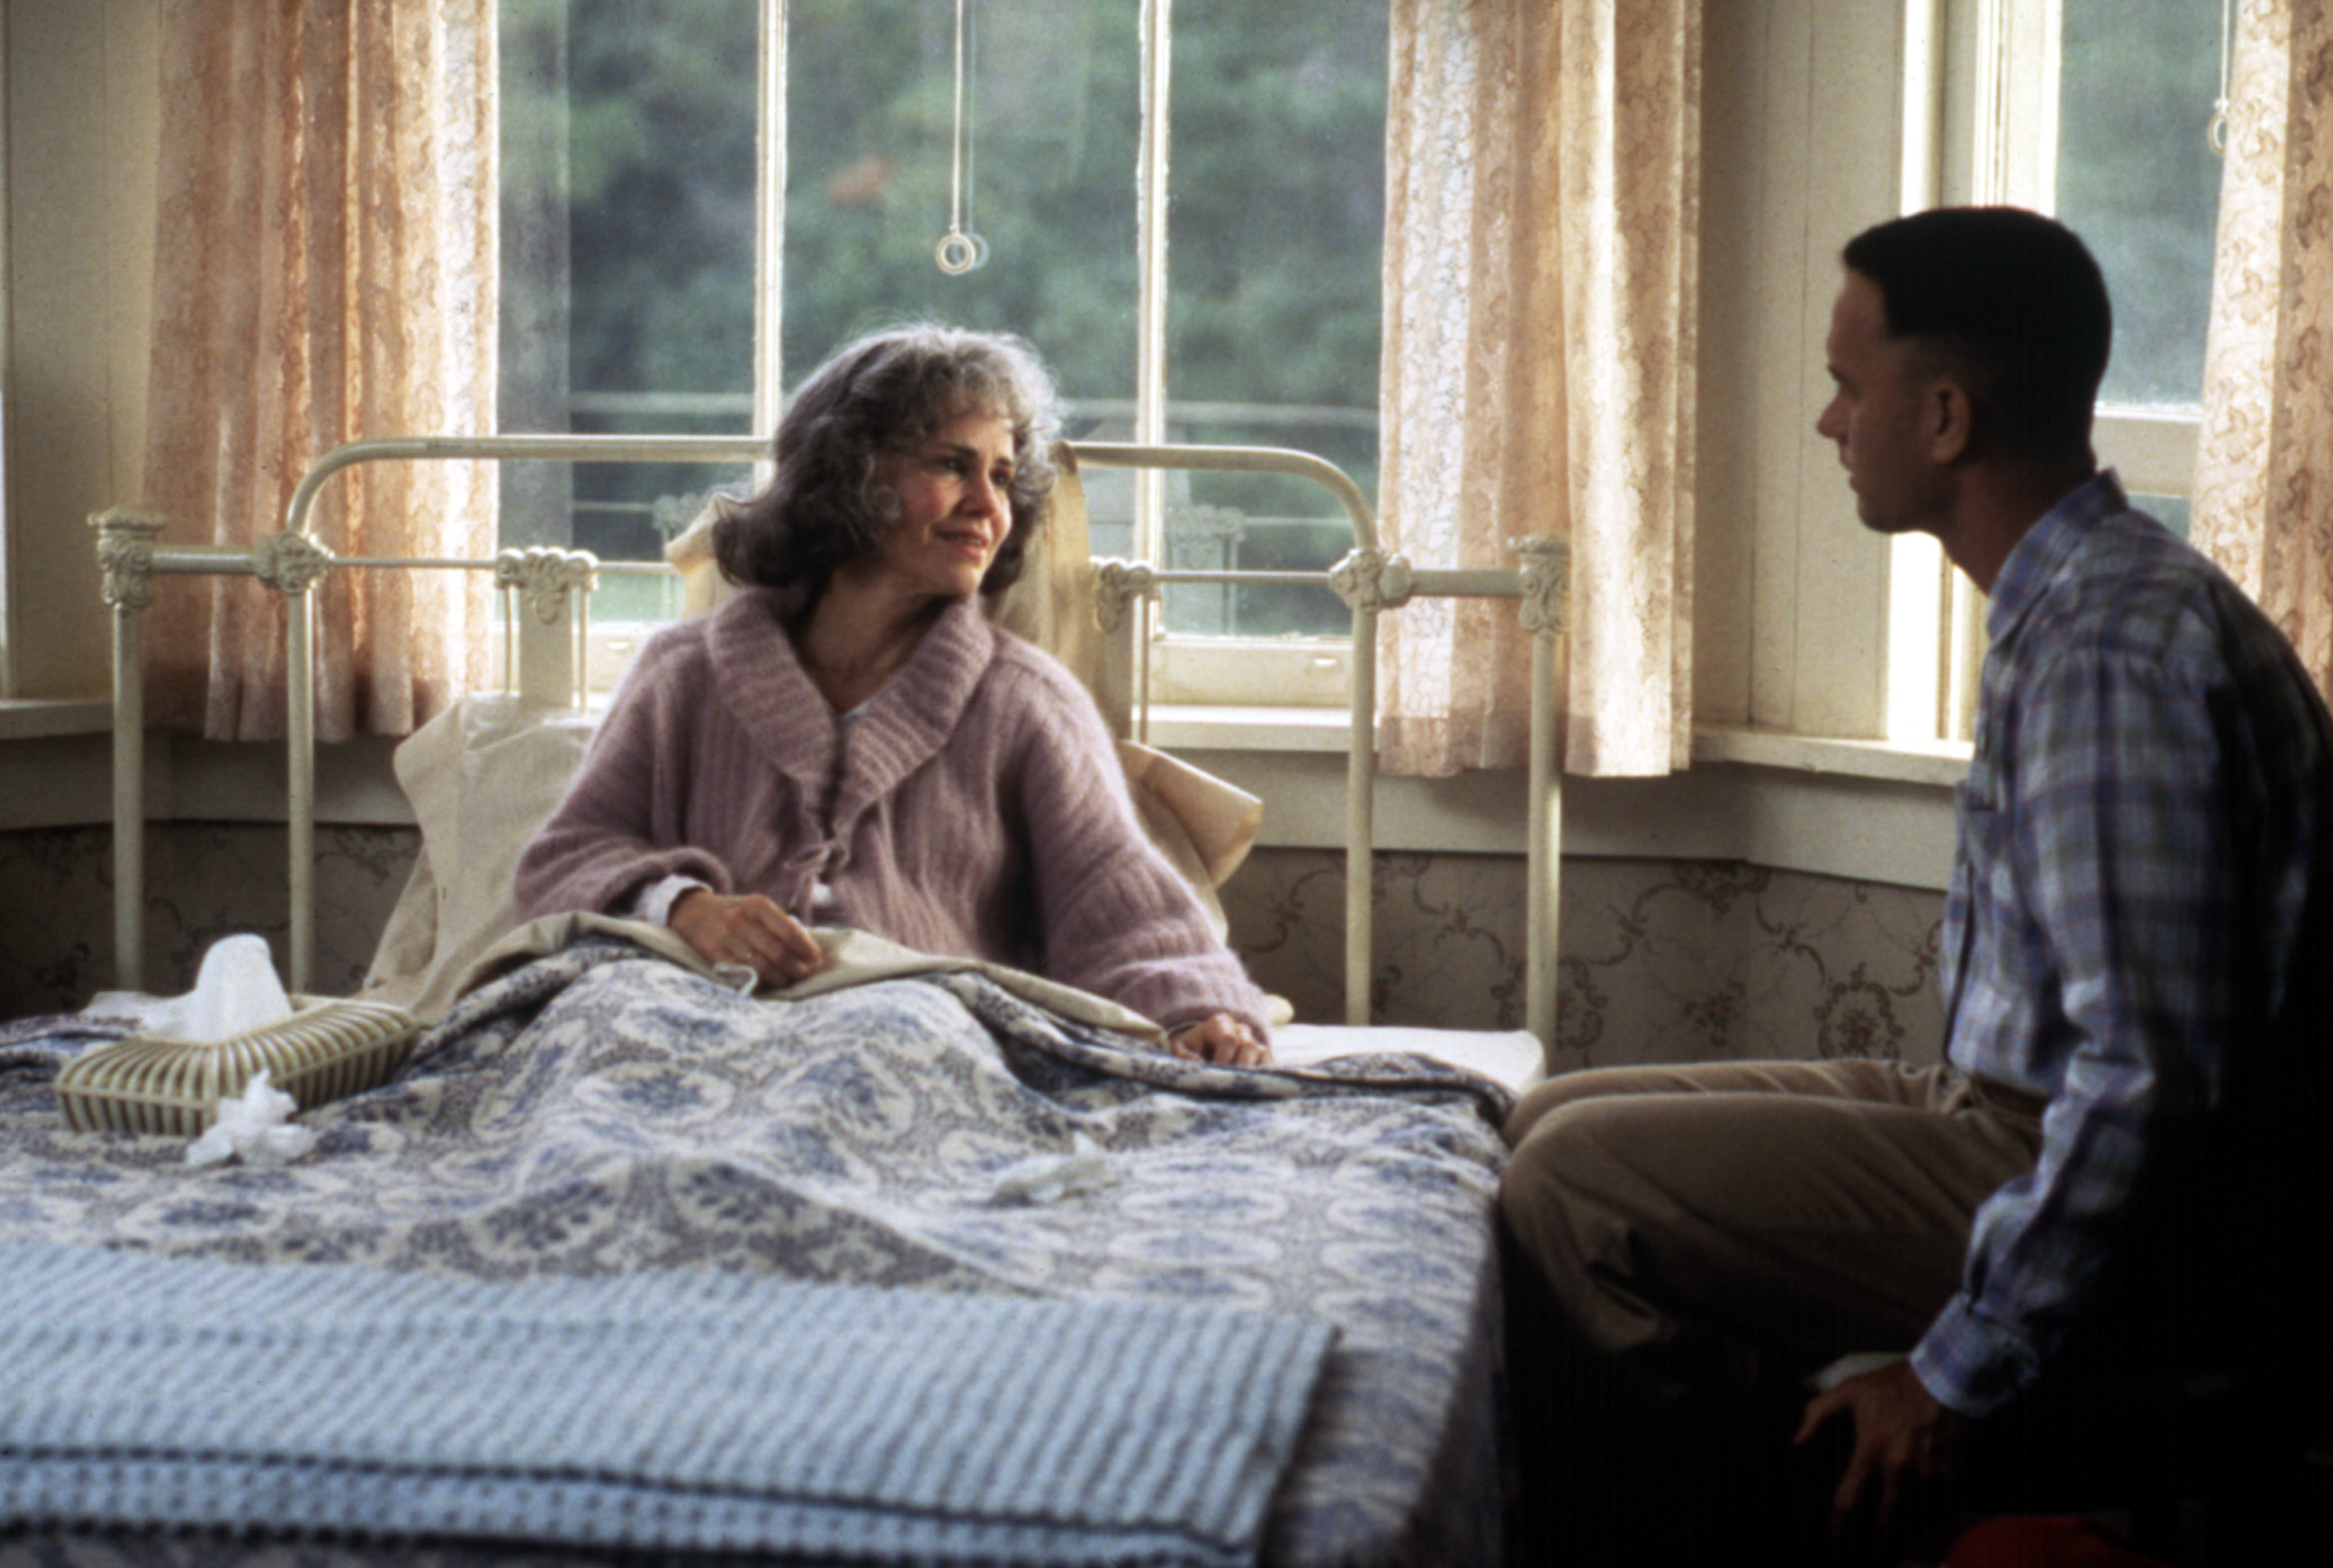 Sally Field on a hospital bed and Tom Hanks on a chair, engaged in conversation